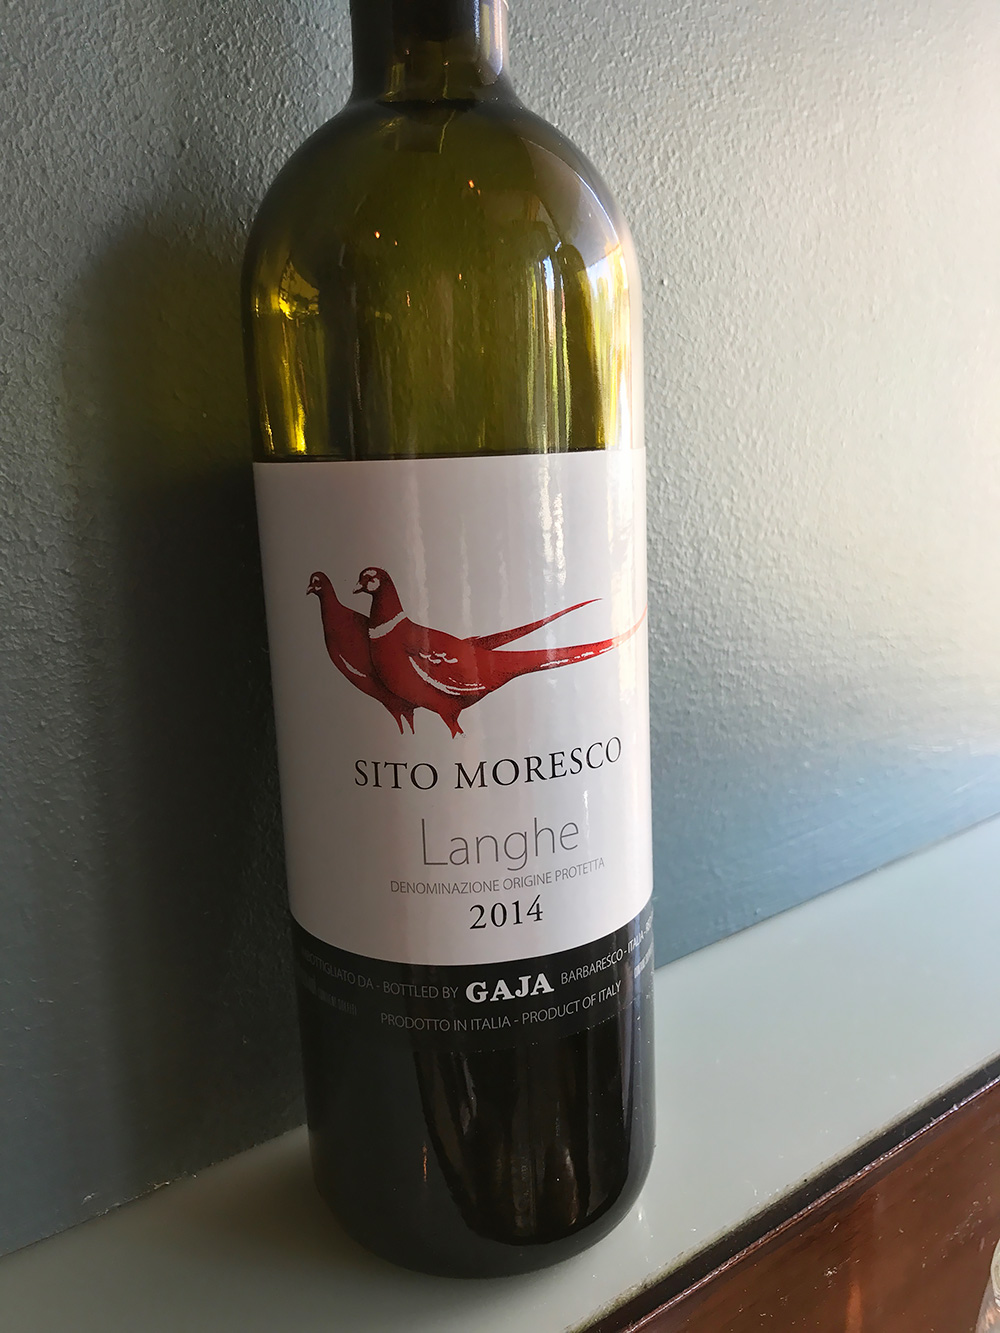 A Gaja Langhe from the well-selected list of Italian red wines.